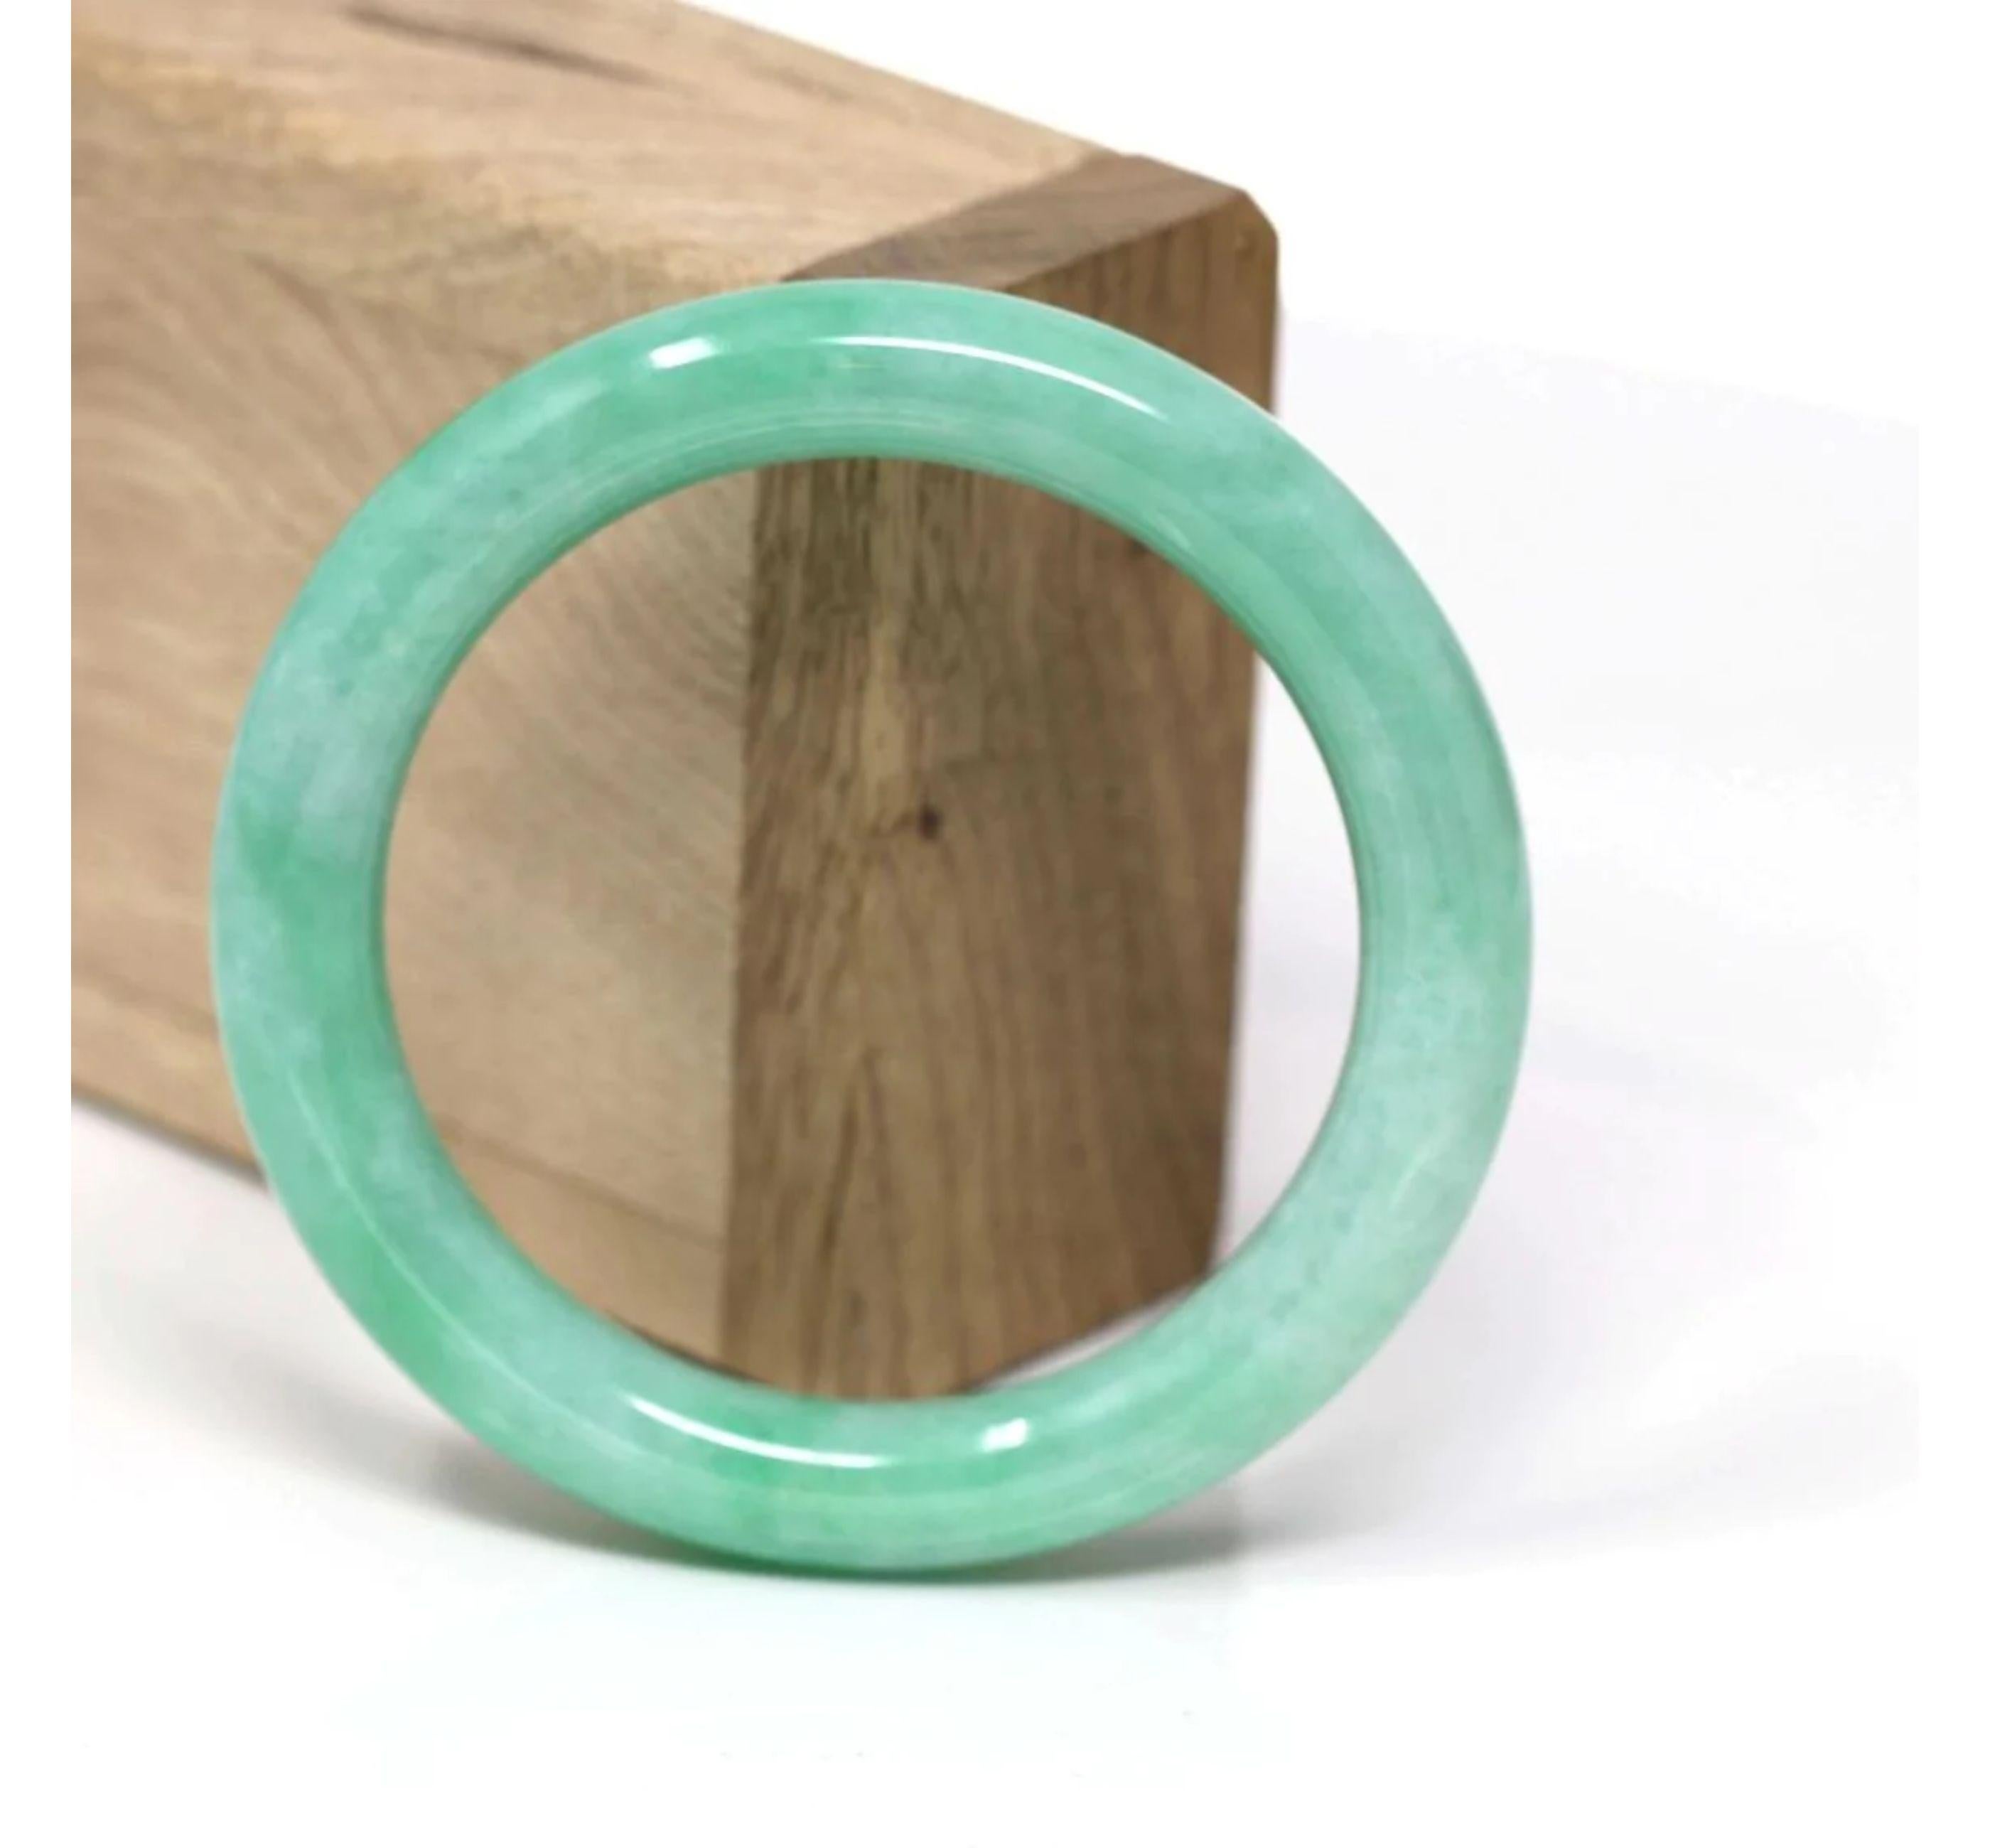 DETAILS--- Genuine Burmese Jadeite Jade Bangle Bracelet. This bangle is made with high-quality genuine Burmese Vibrant Green Jadeite jade, The jade texture is so translucent with apple green color inside. The green color and translucent white